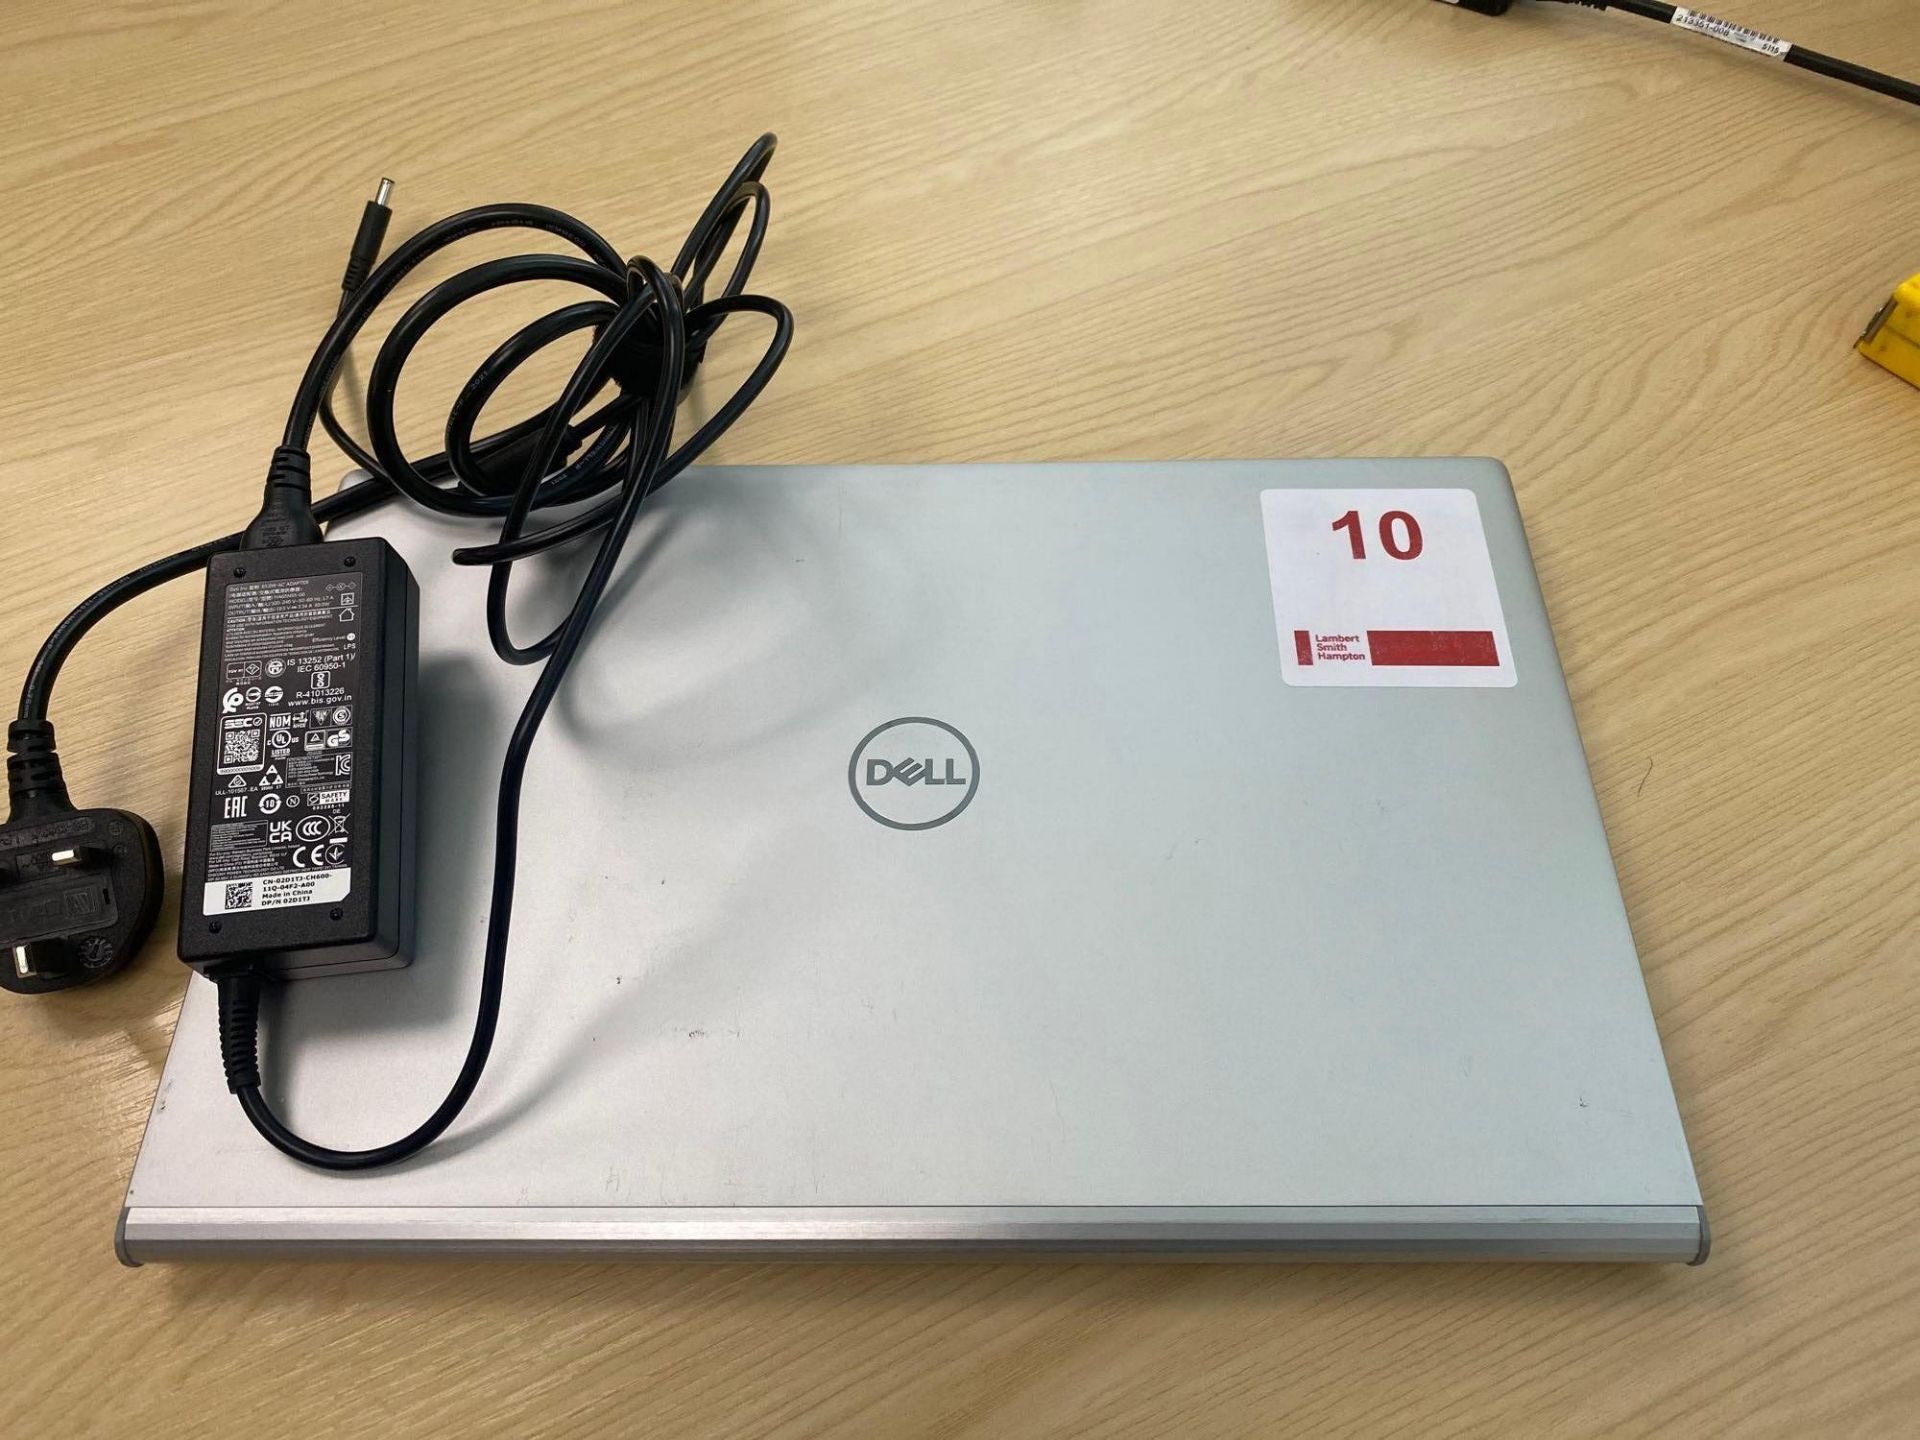 Dell Inspiron 15 7000, 15” laptop with i5 processor complete with charger - Image 7 of 7